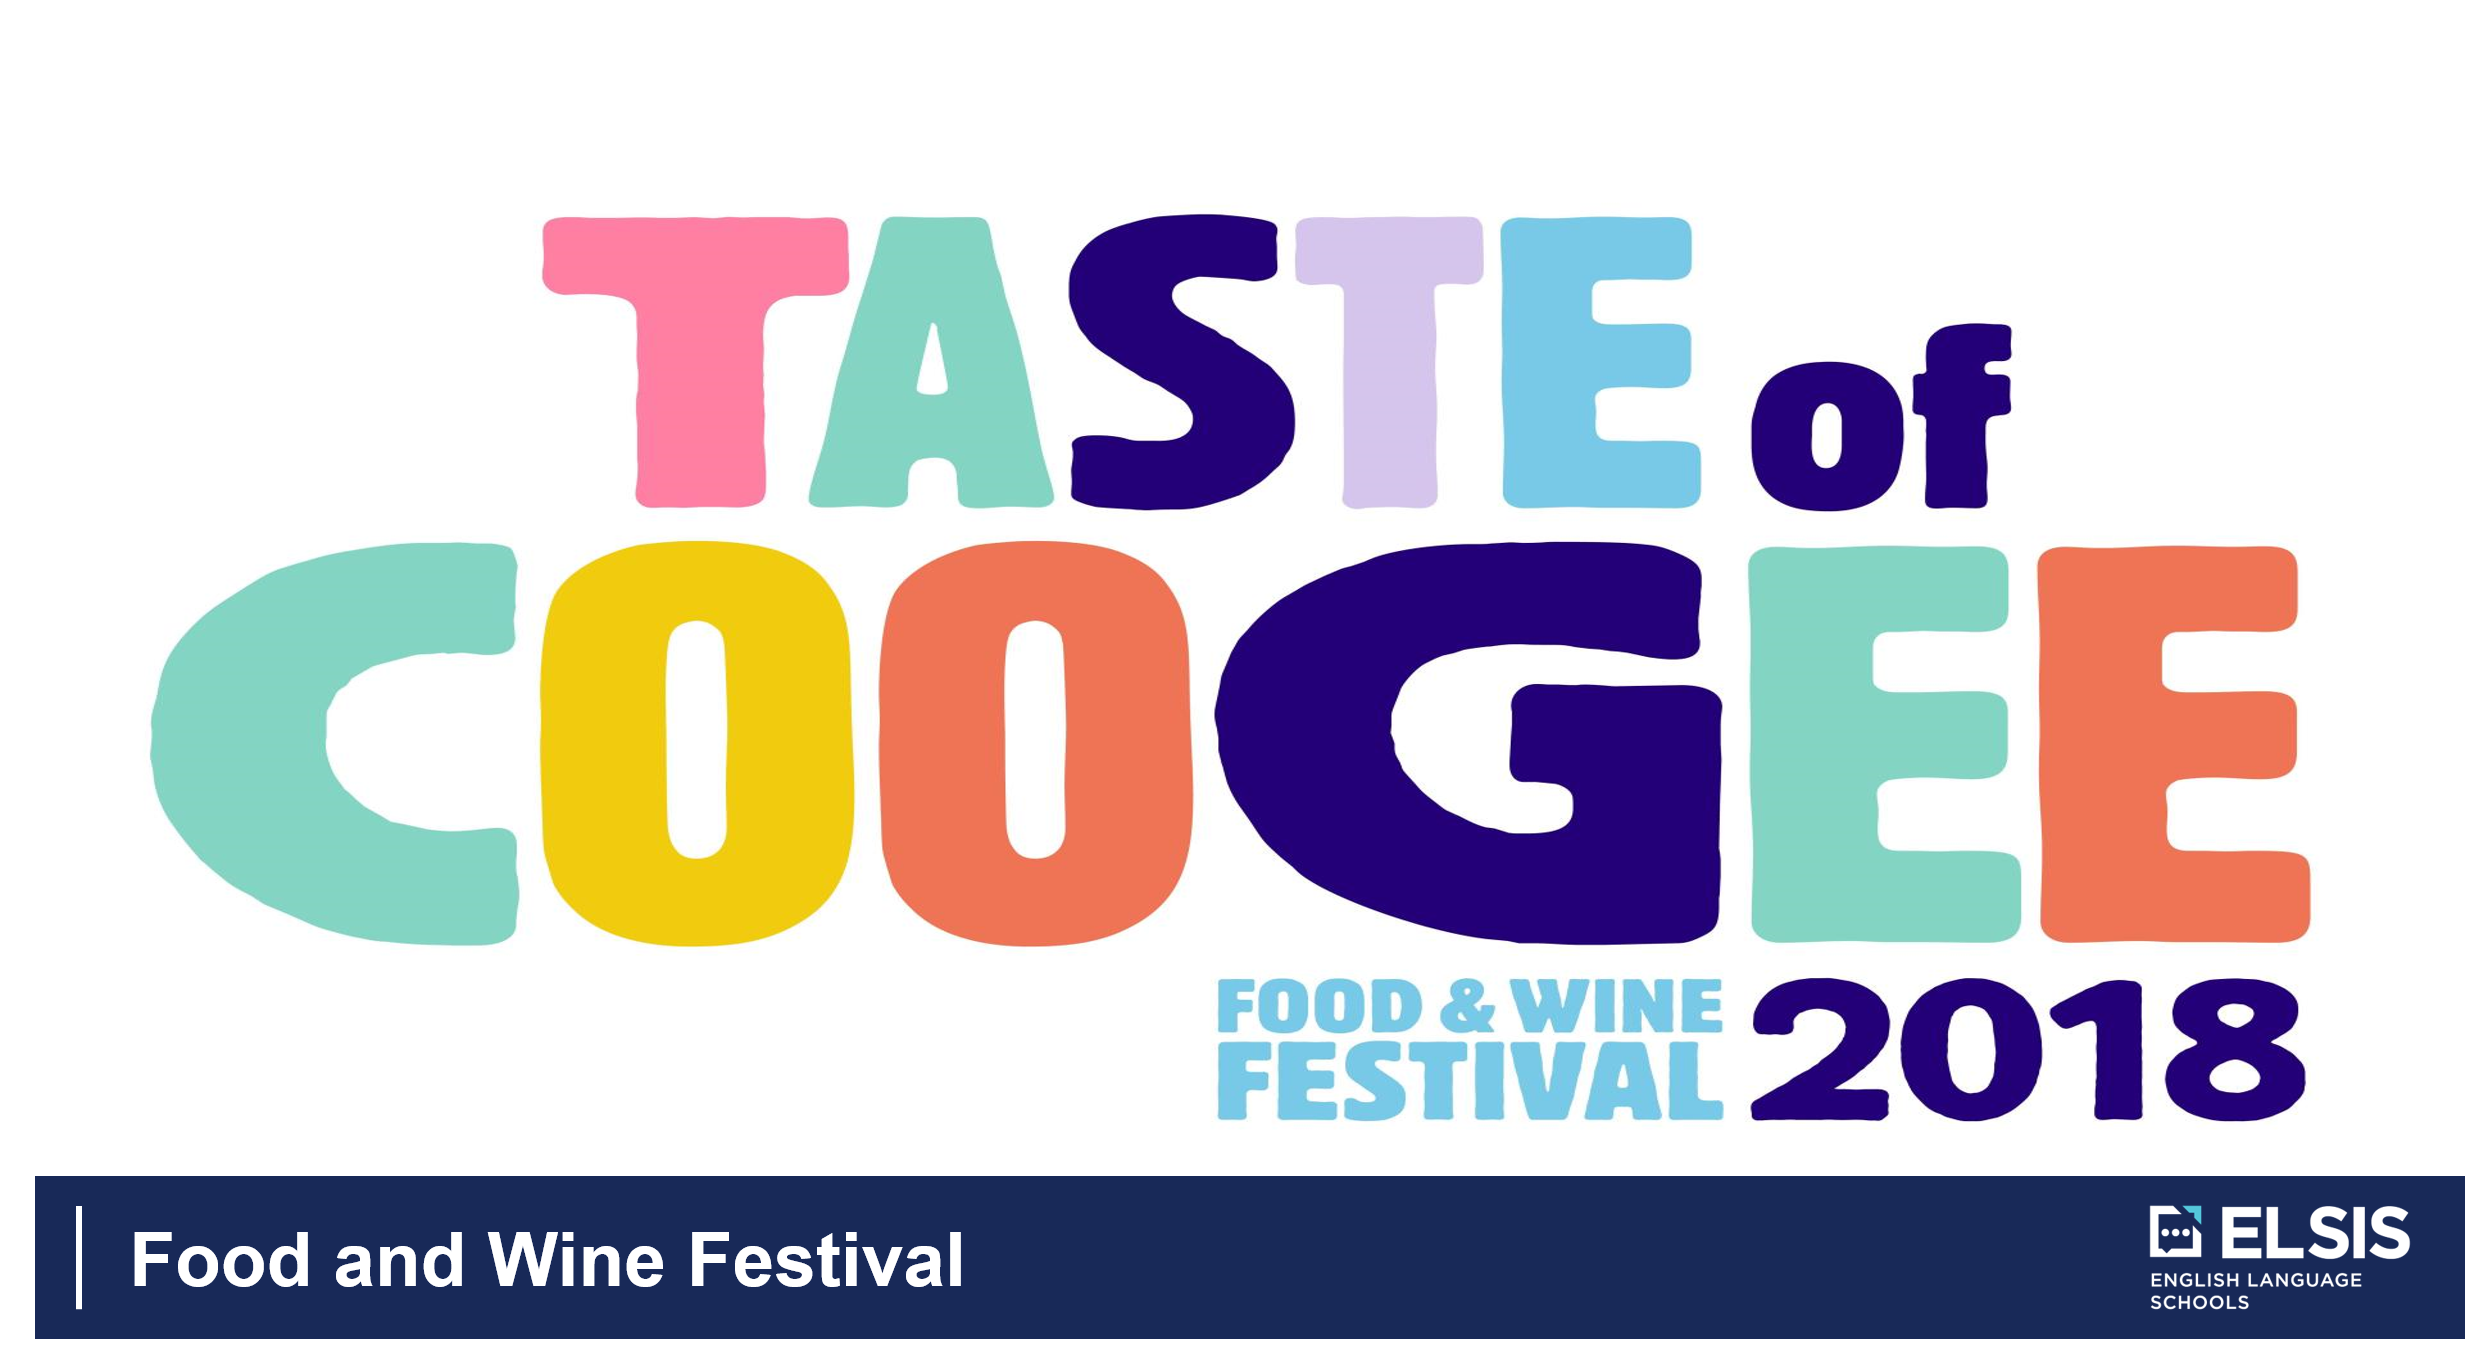 Coogee Food and wine festival